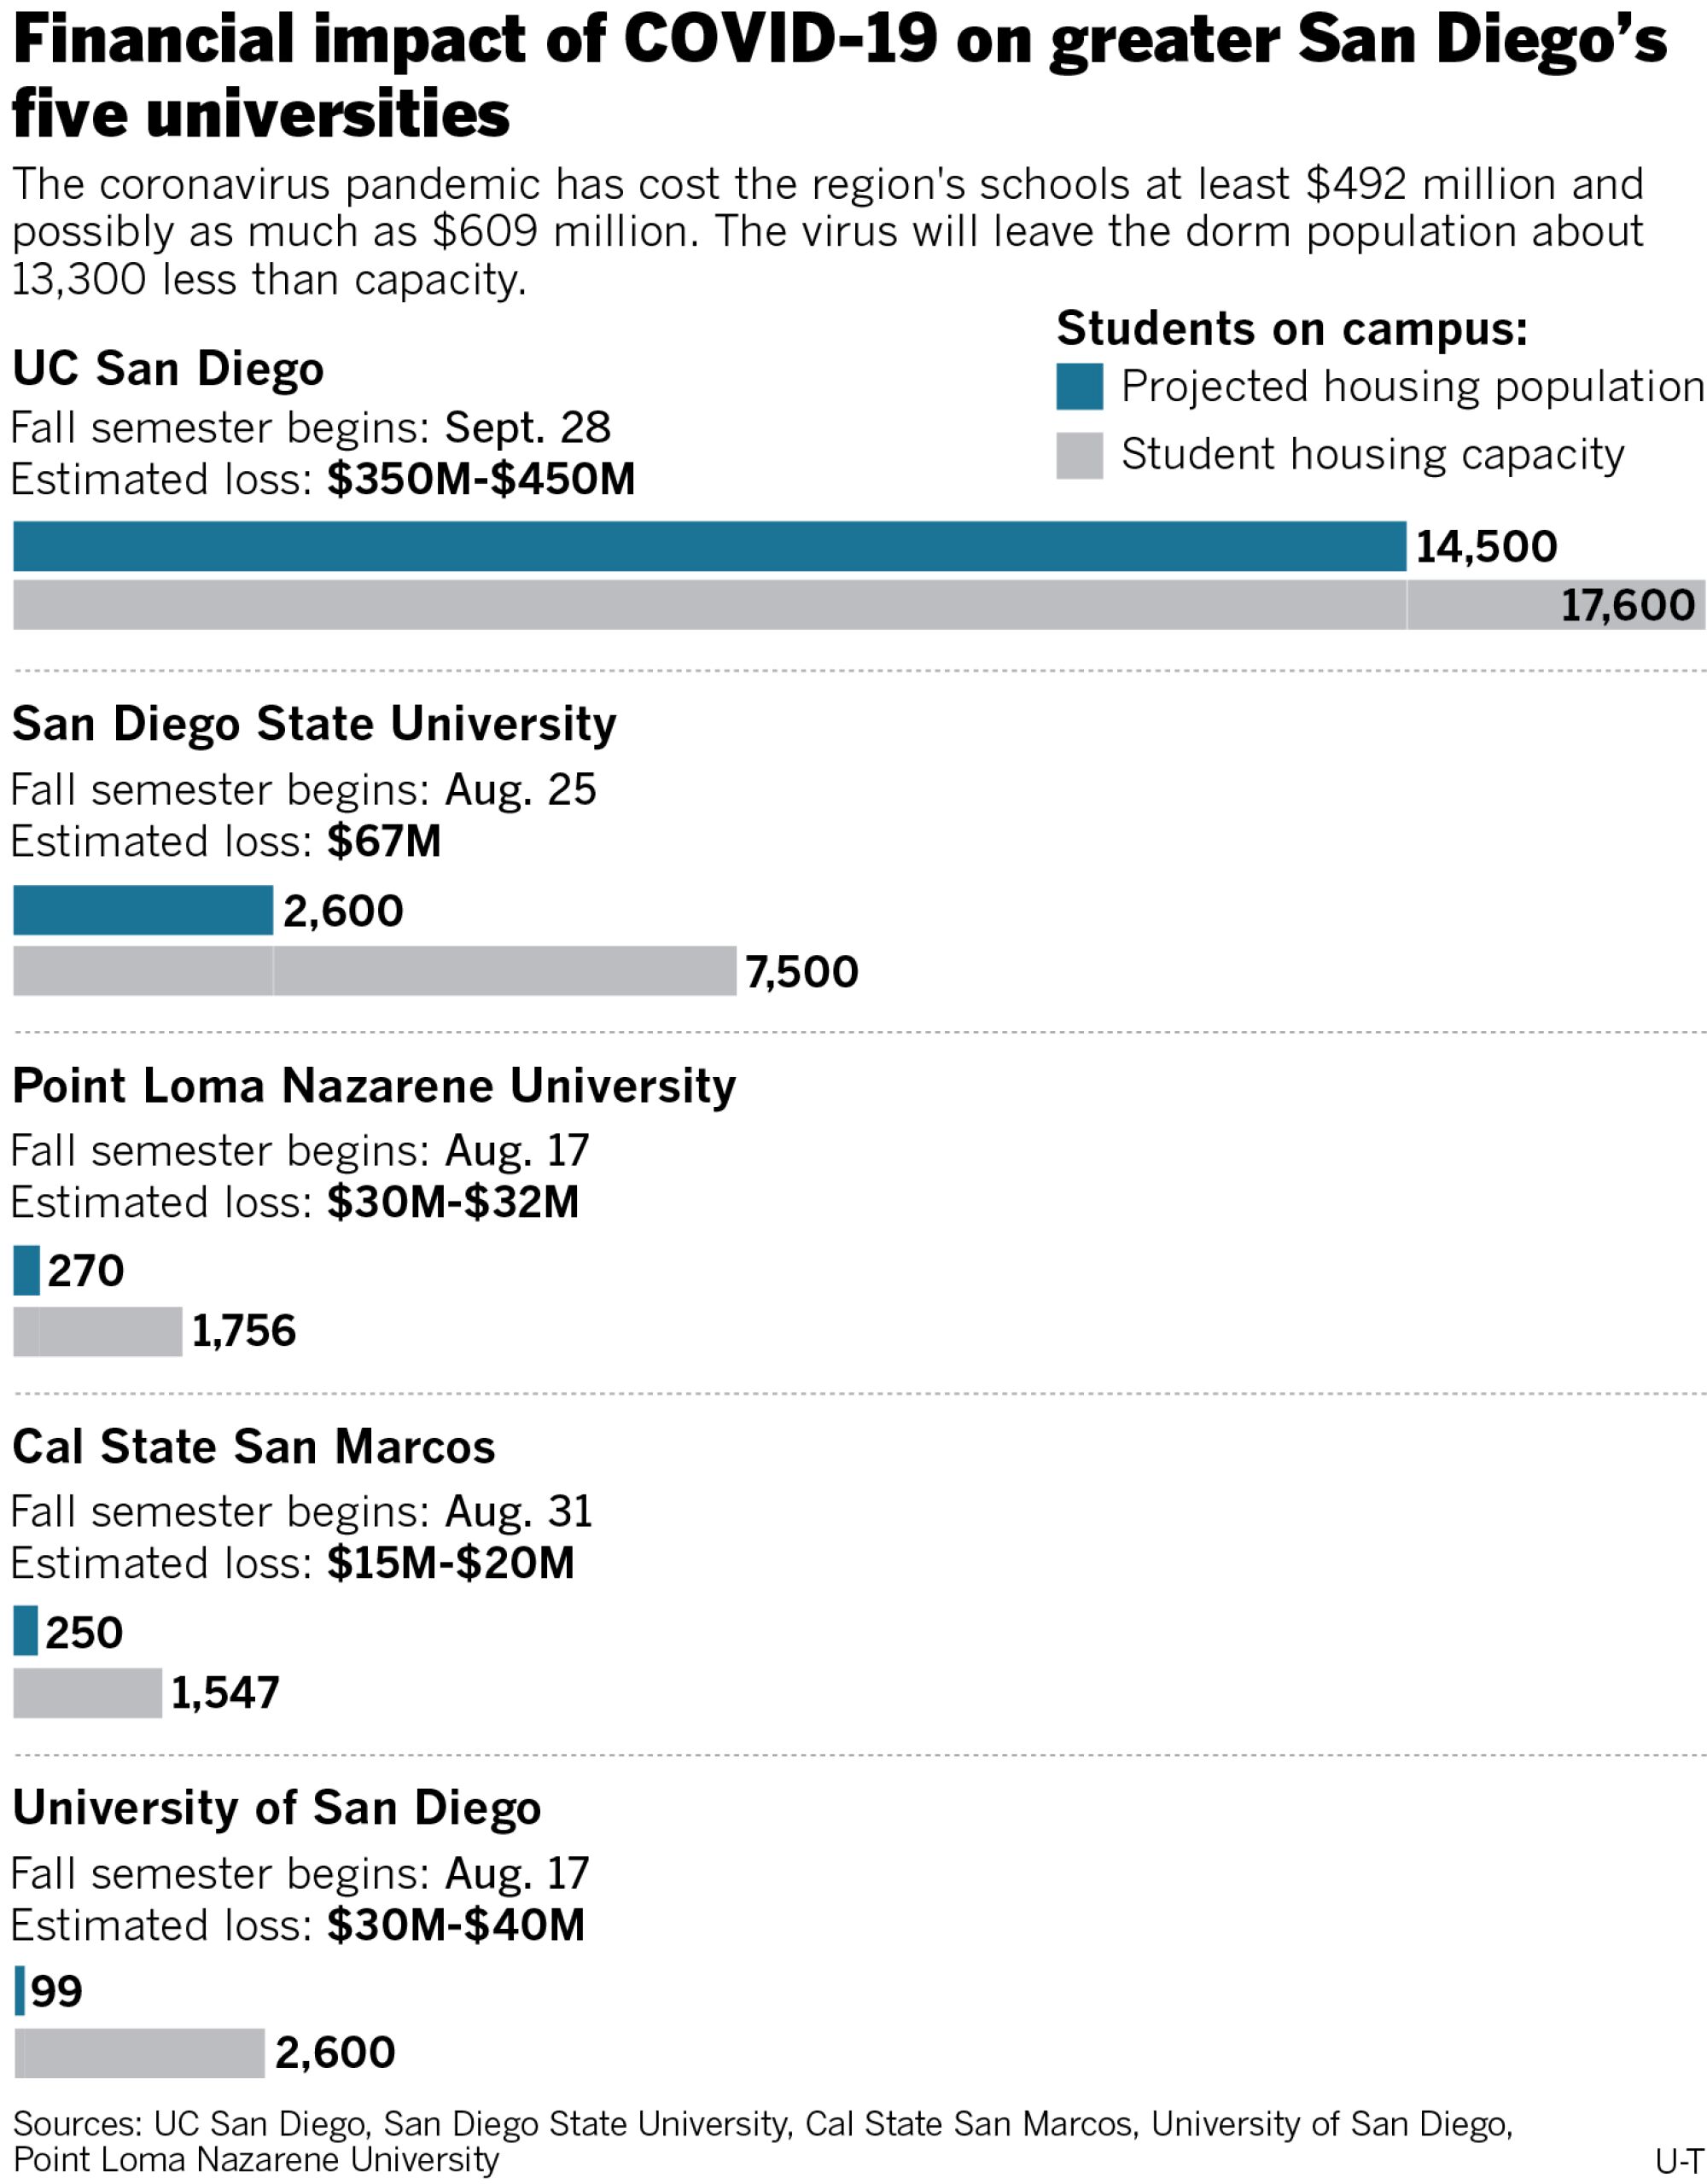 Financial impact of COVID-19 on greater San Diego's five universities